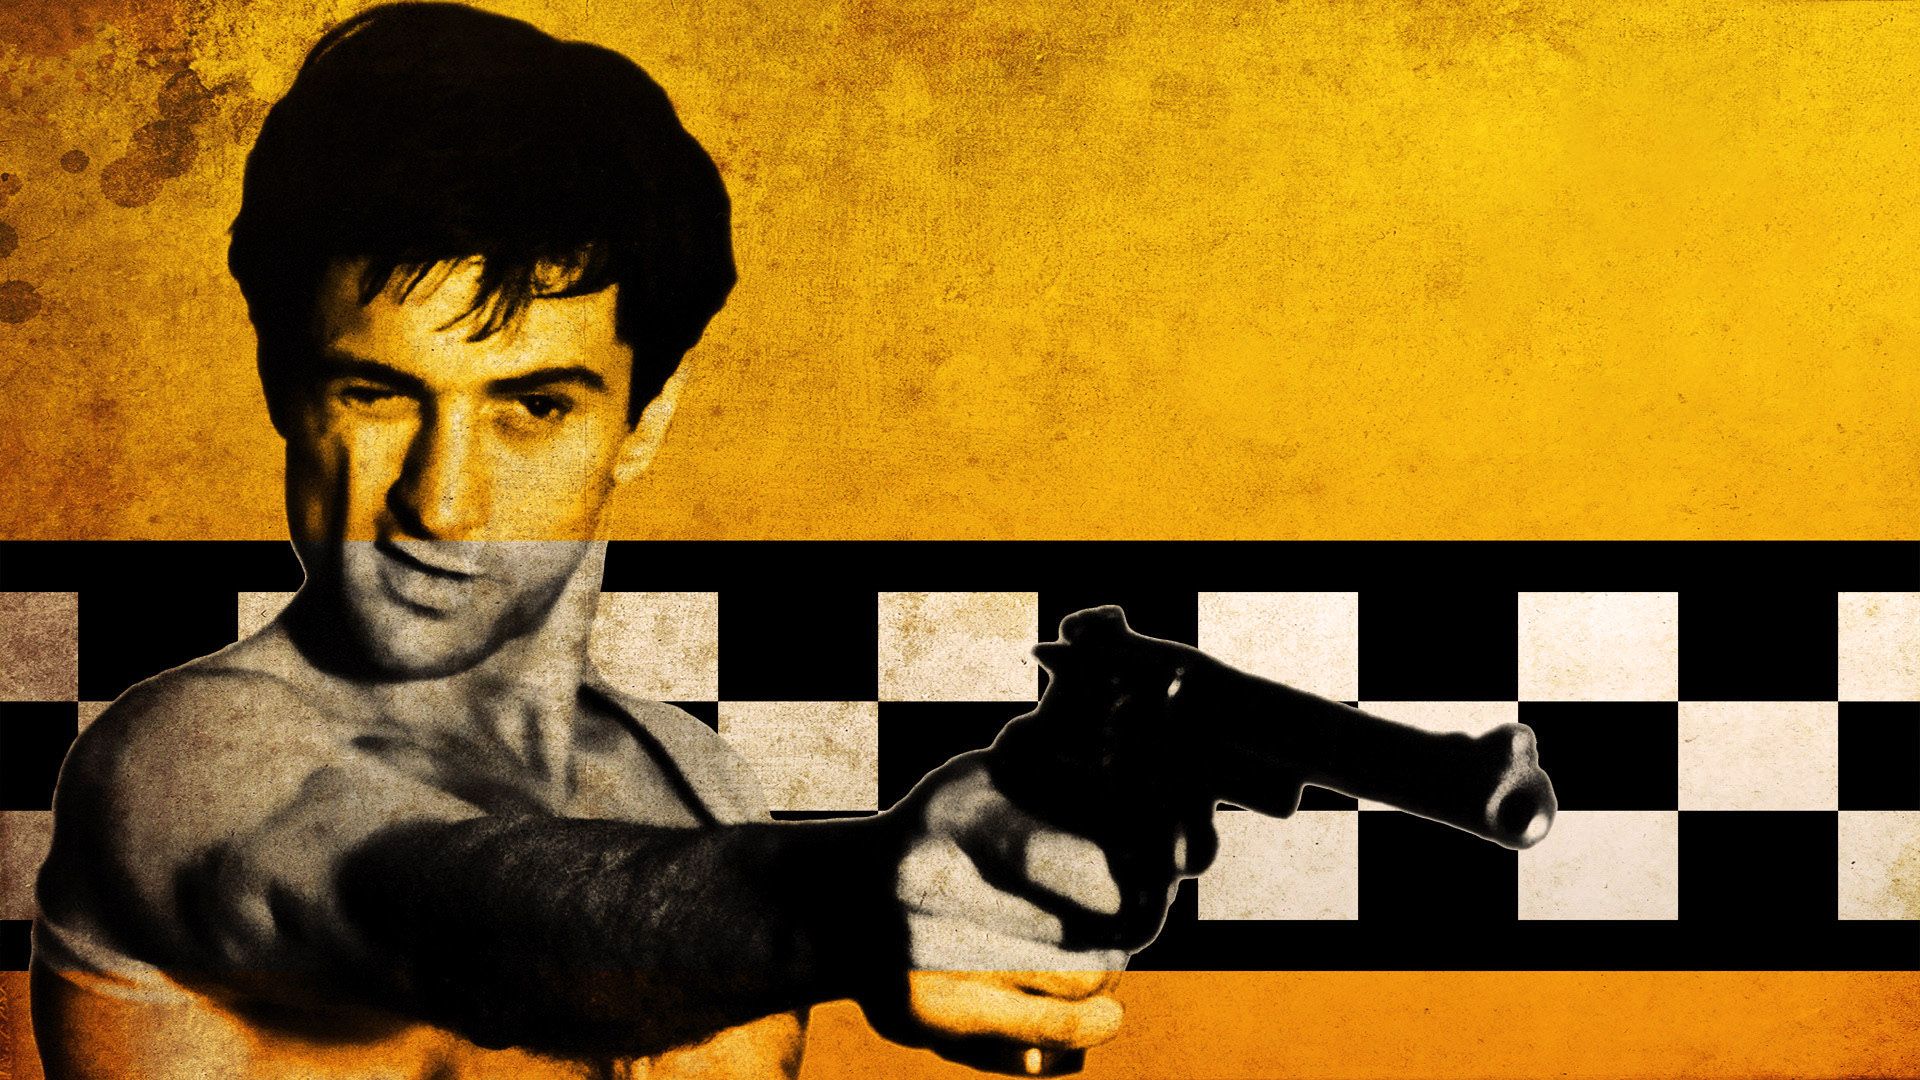 Taxi Driver background